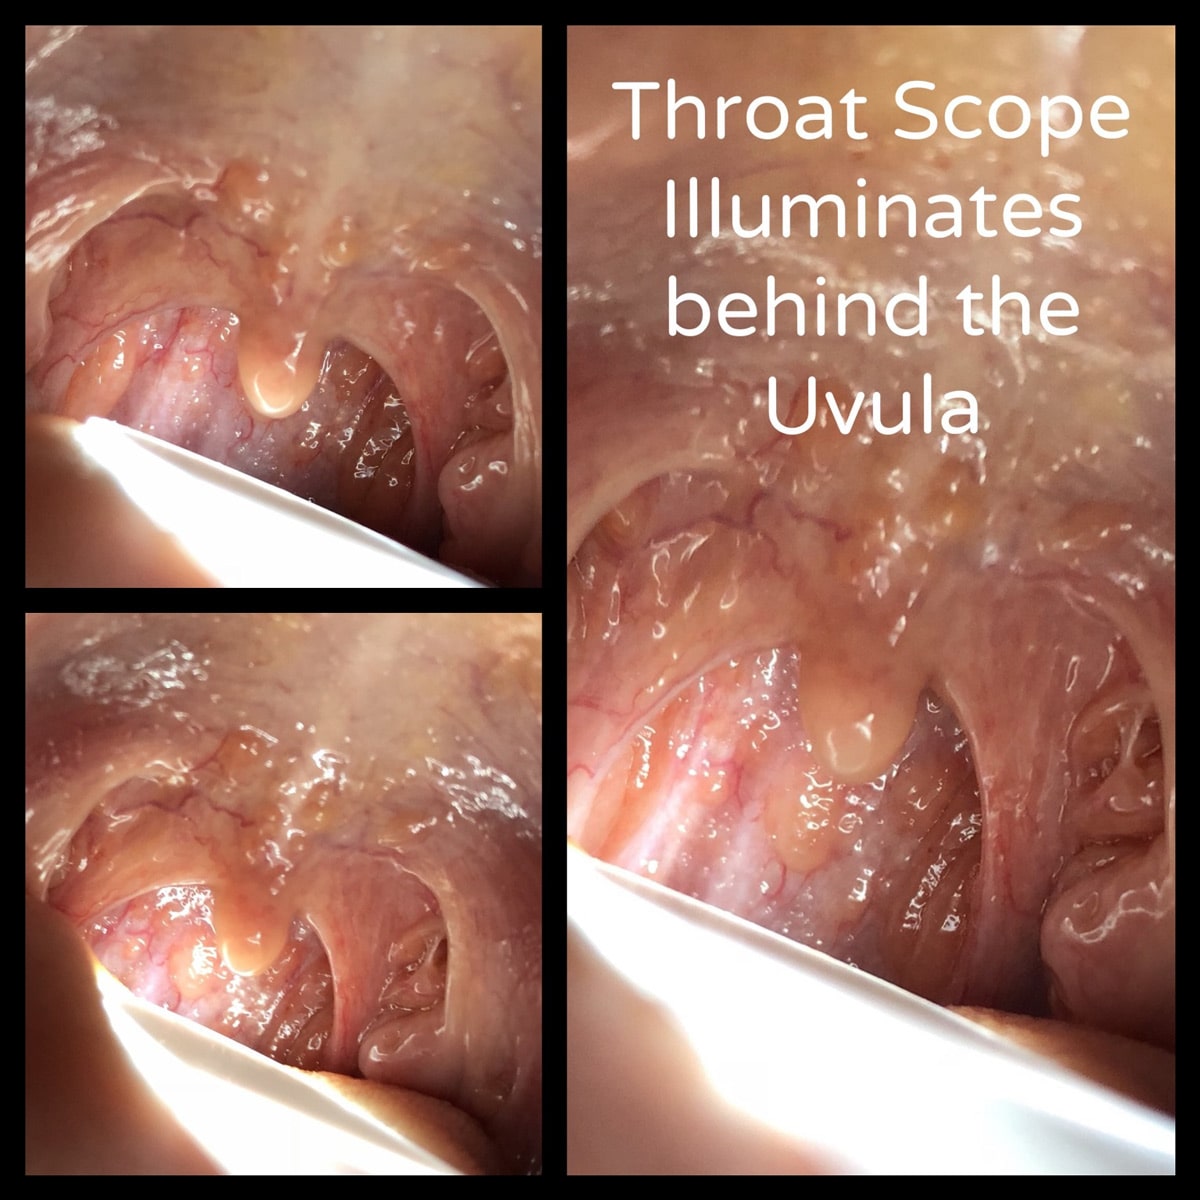 Throat Scope illuminating the inside of a patient's mouth